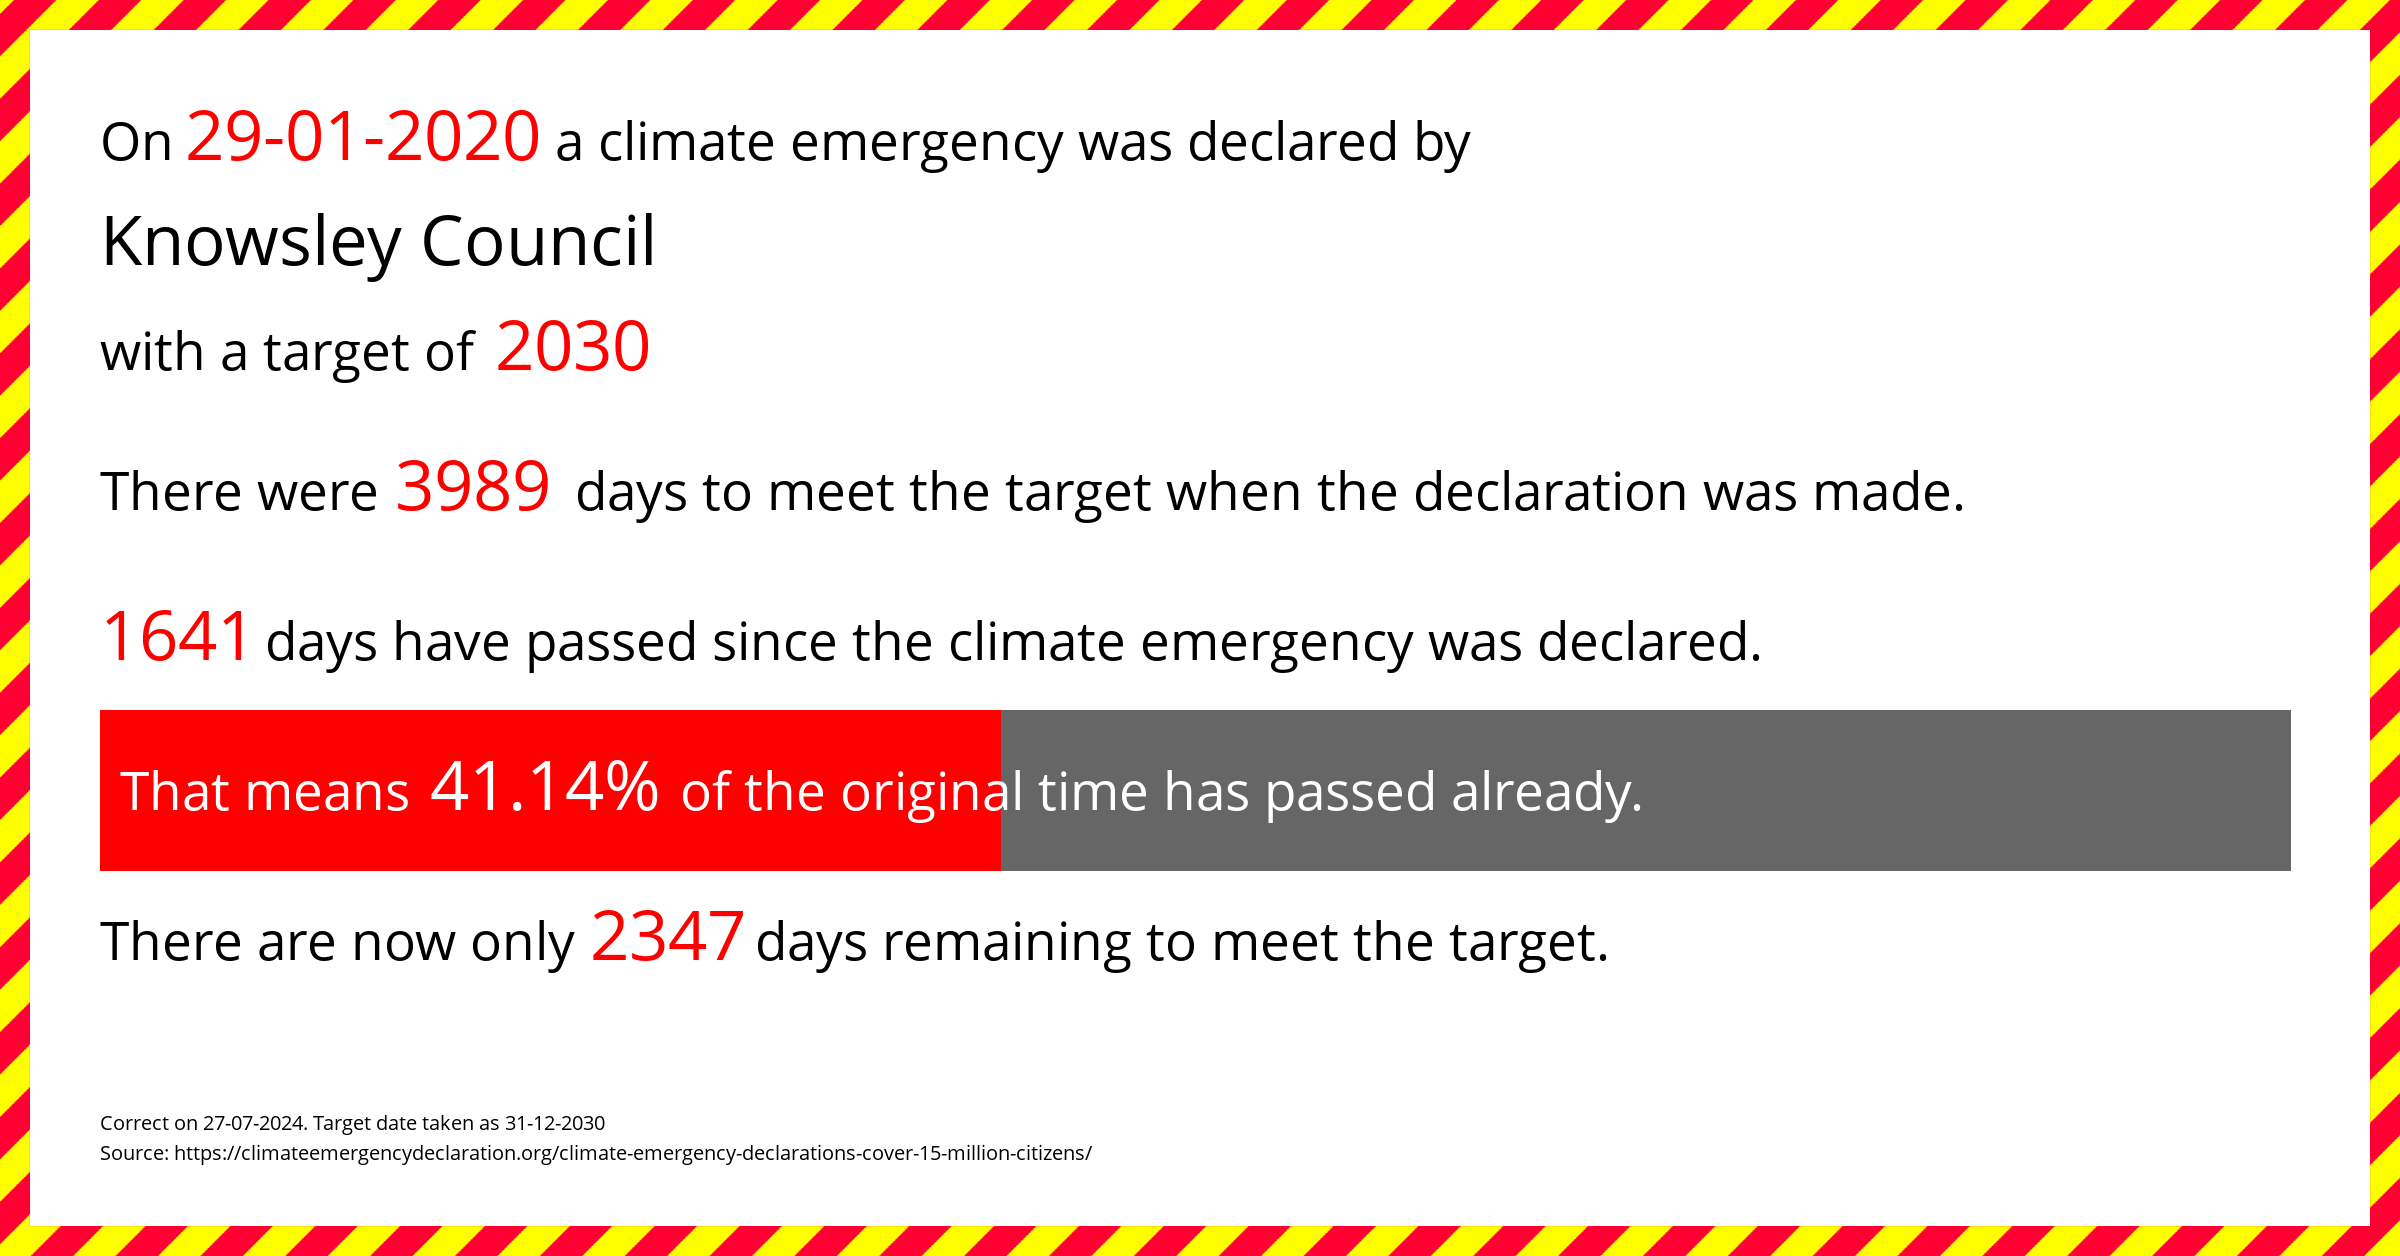 Knowsley Council declared a Climate emergency on Wednesday 29th January 2020, with a target of 2030.